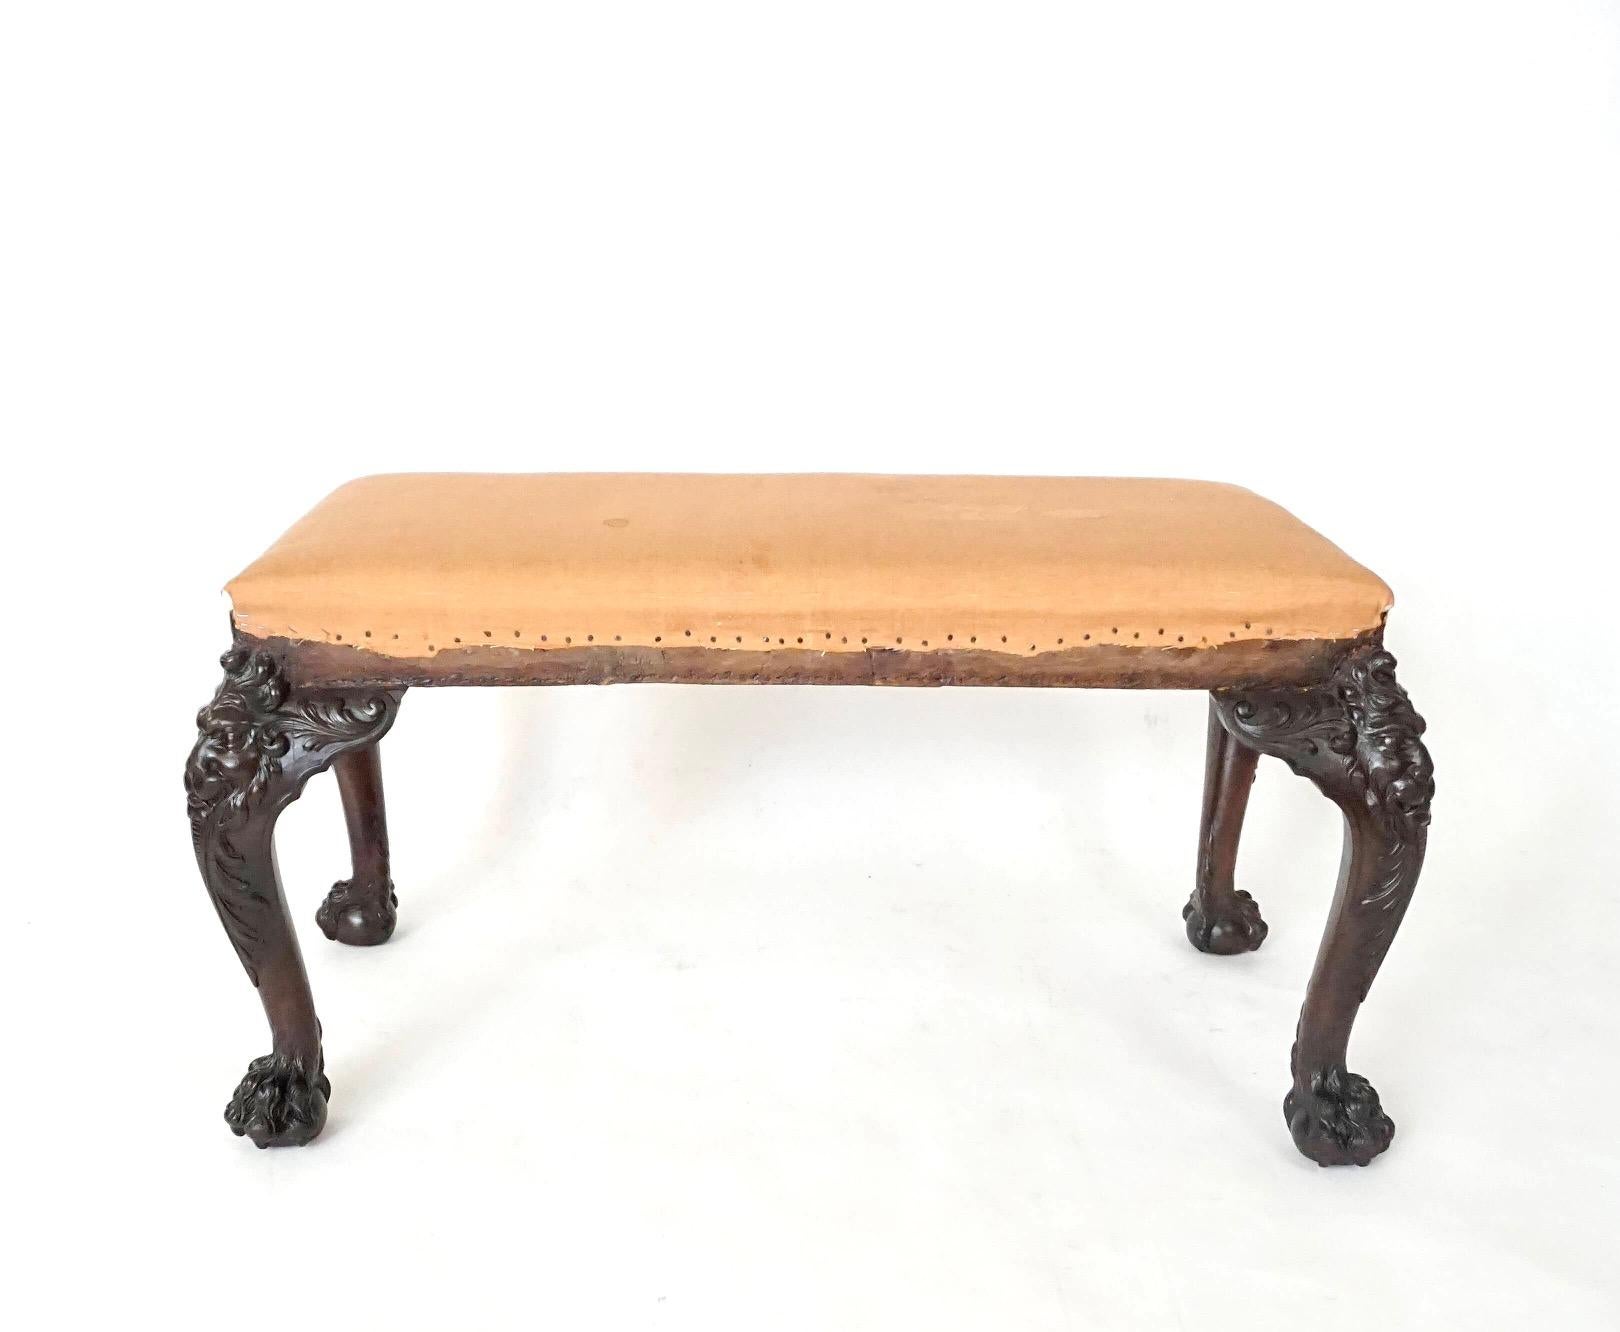 Hand-Carved George II Style Carved Mahogany Long Stool or Bench by Henry Samuel, circa 1890 For Sale